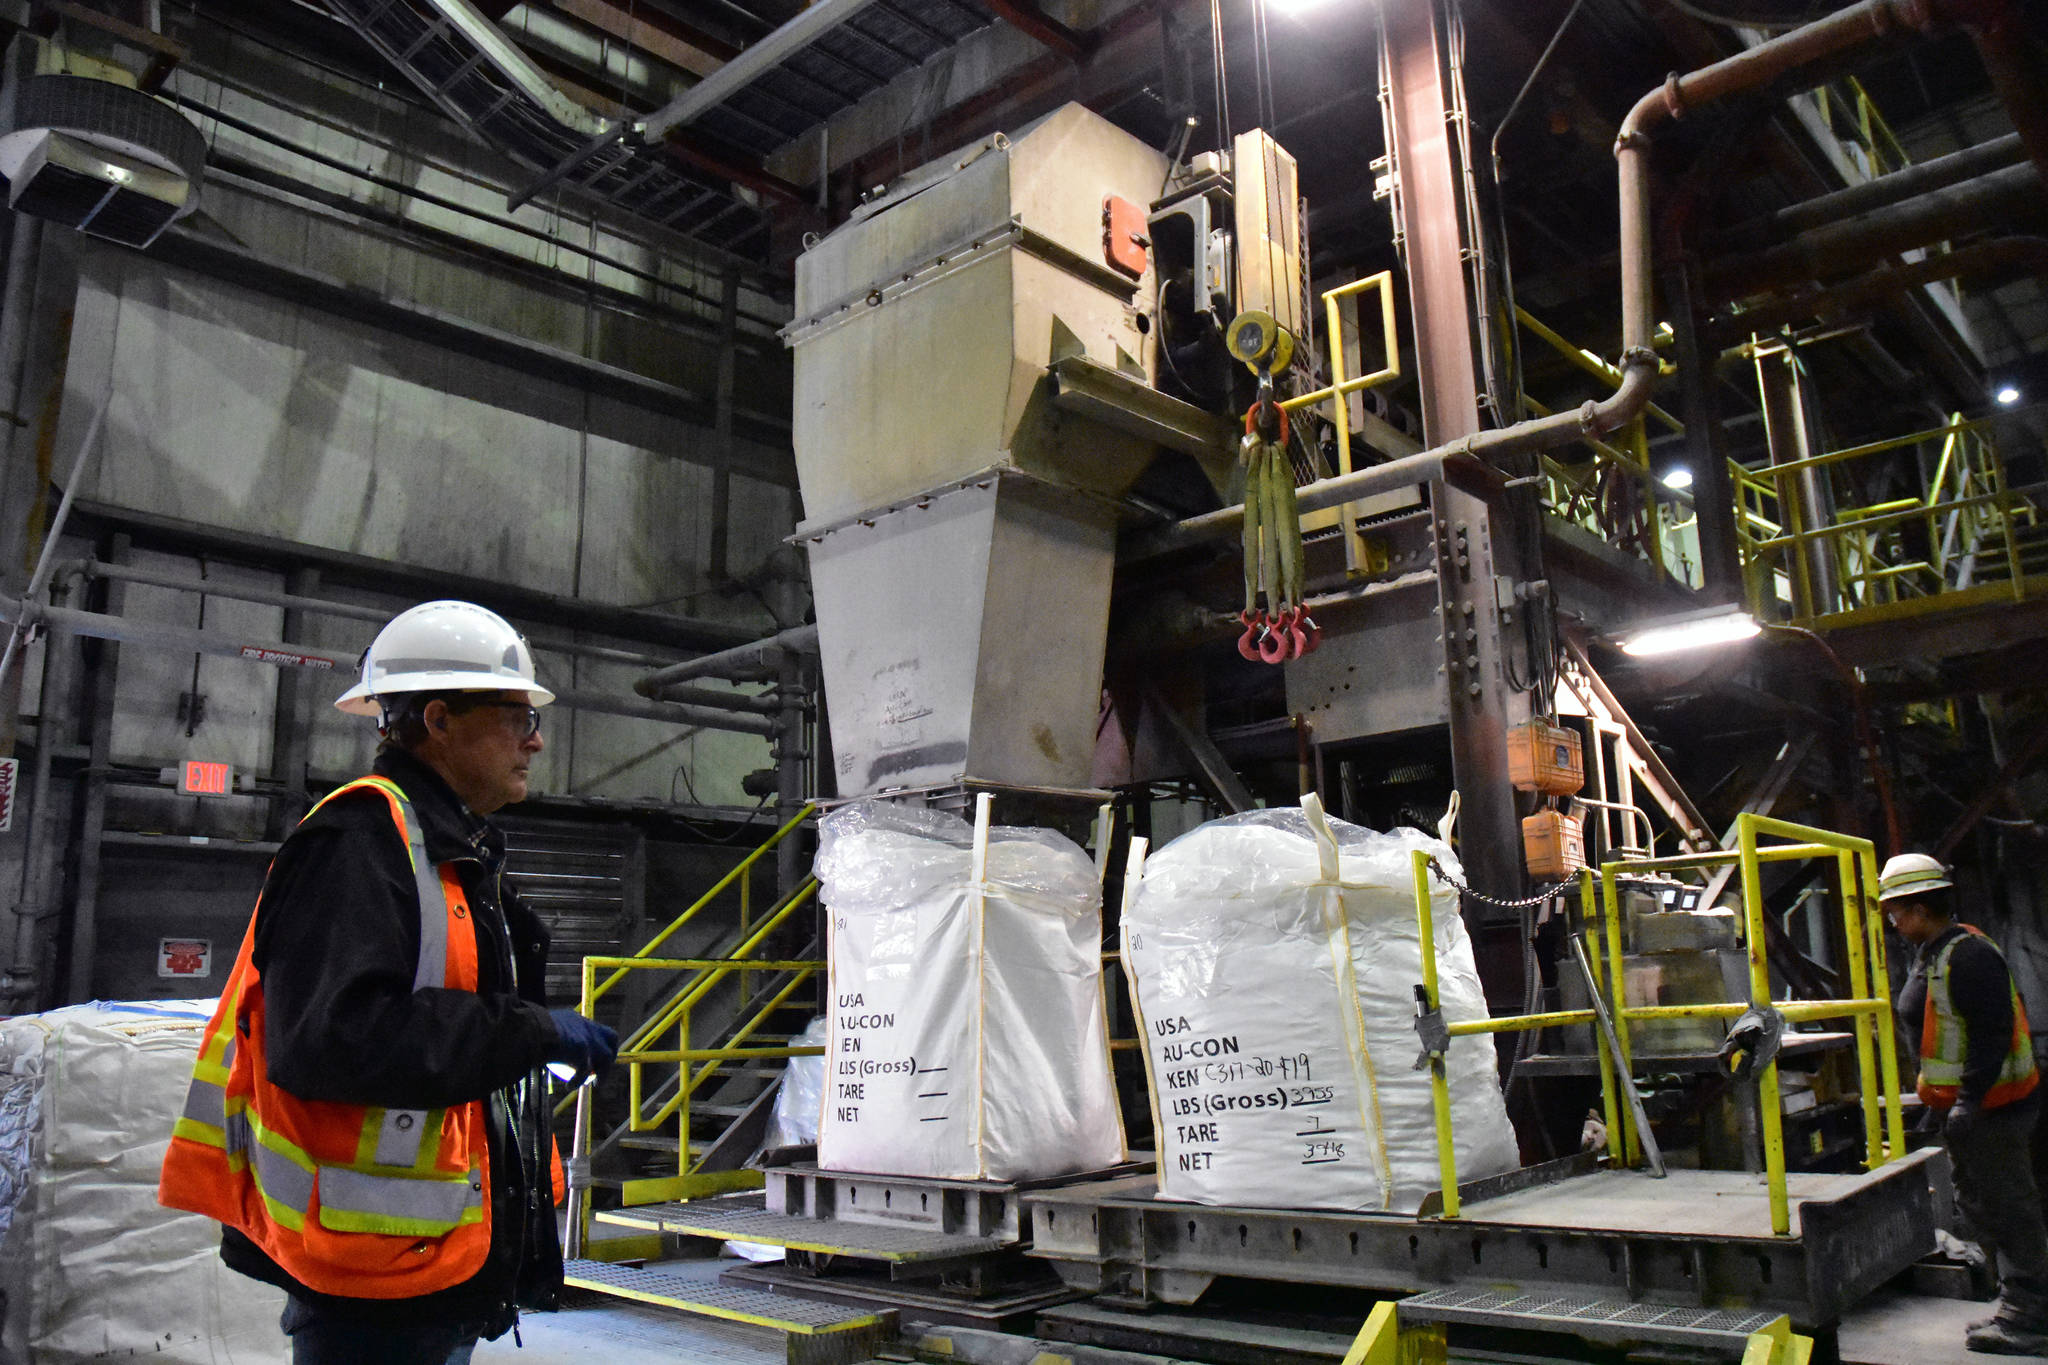 Mill Manager Wayne Colwell in the mill at the Kensington Gold Mine on Monday, Oct. 14, 2019. (Peter Segall | Juneau Empire)